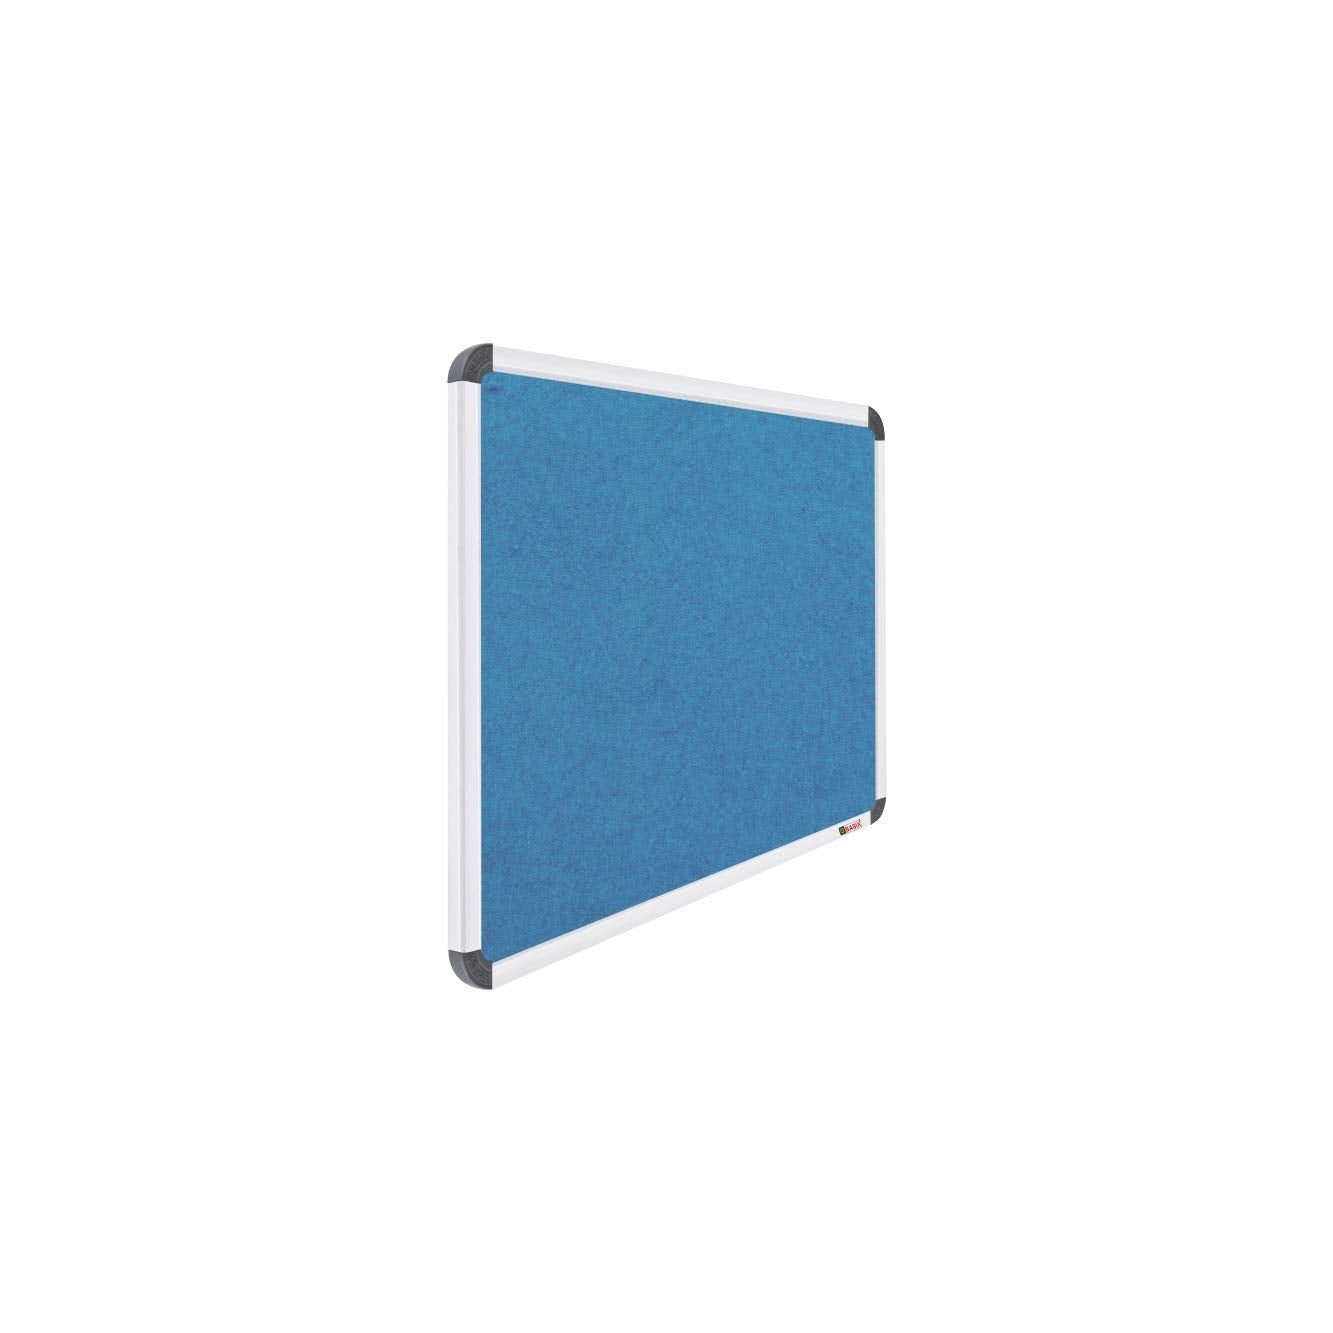 OBASIX® Superior Series Pin-up/Notice Board Turquoise Blue with 20 Pushpins | Natural Finesse Heavy Aluminium Frame